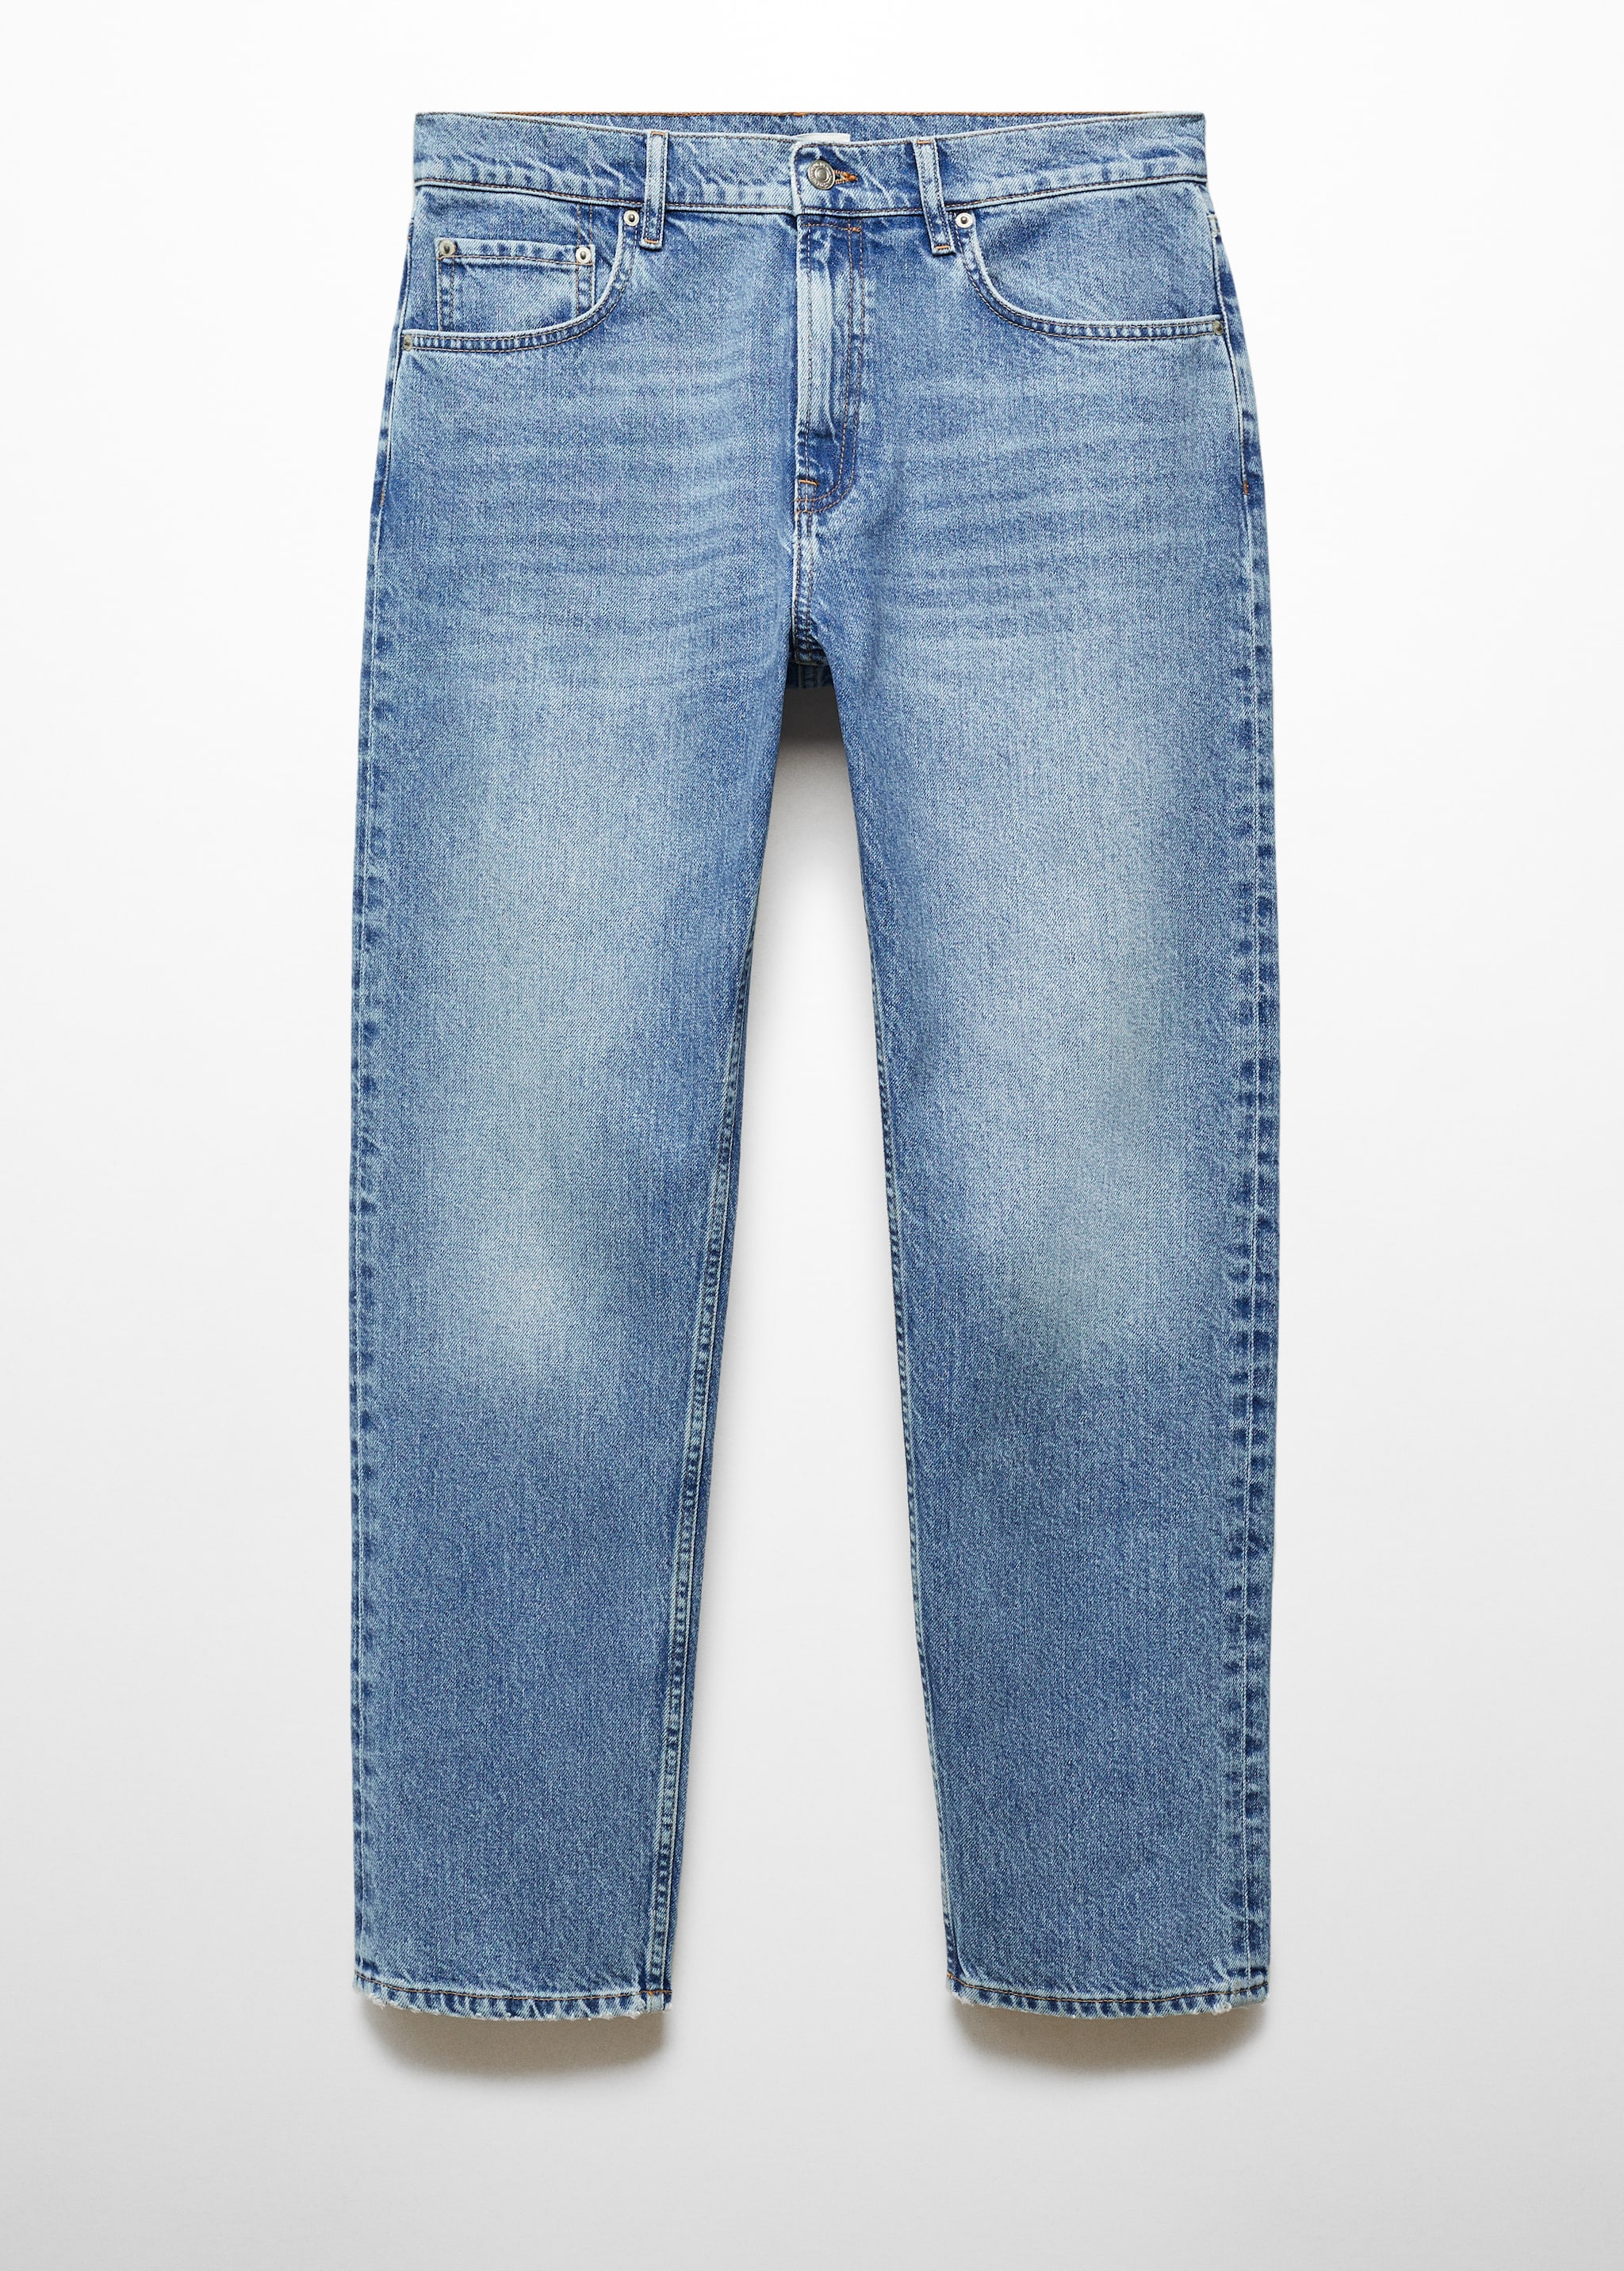 Regular fit medium wash jeans - Article without model